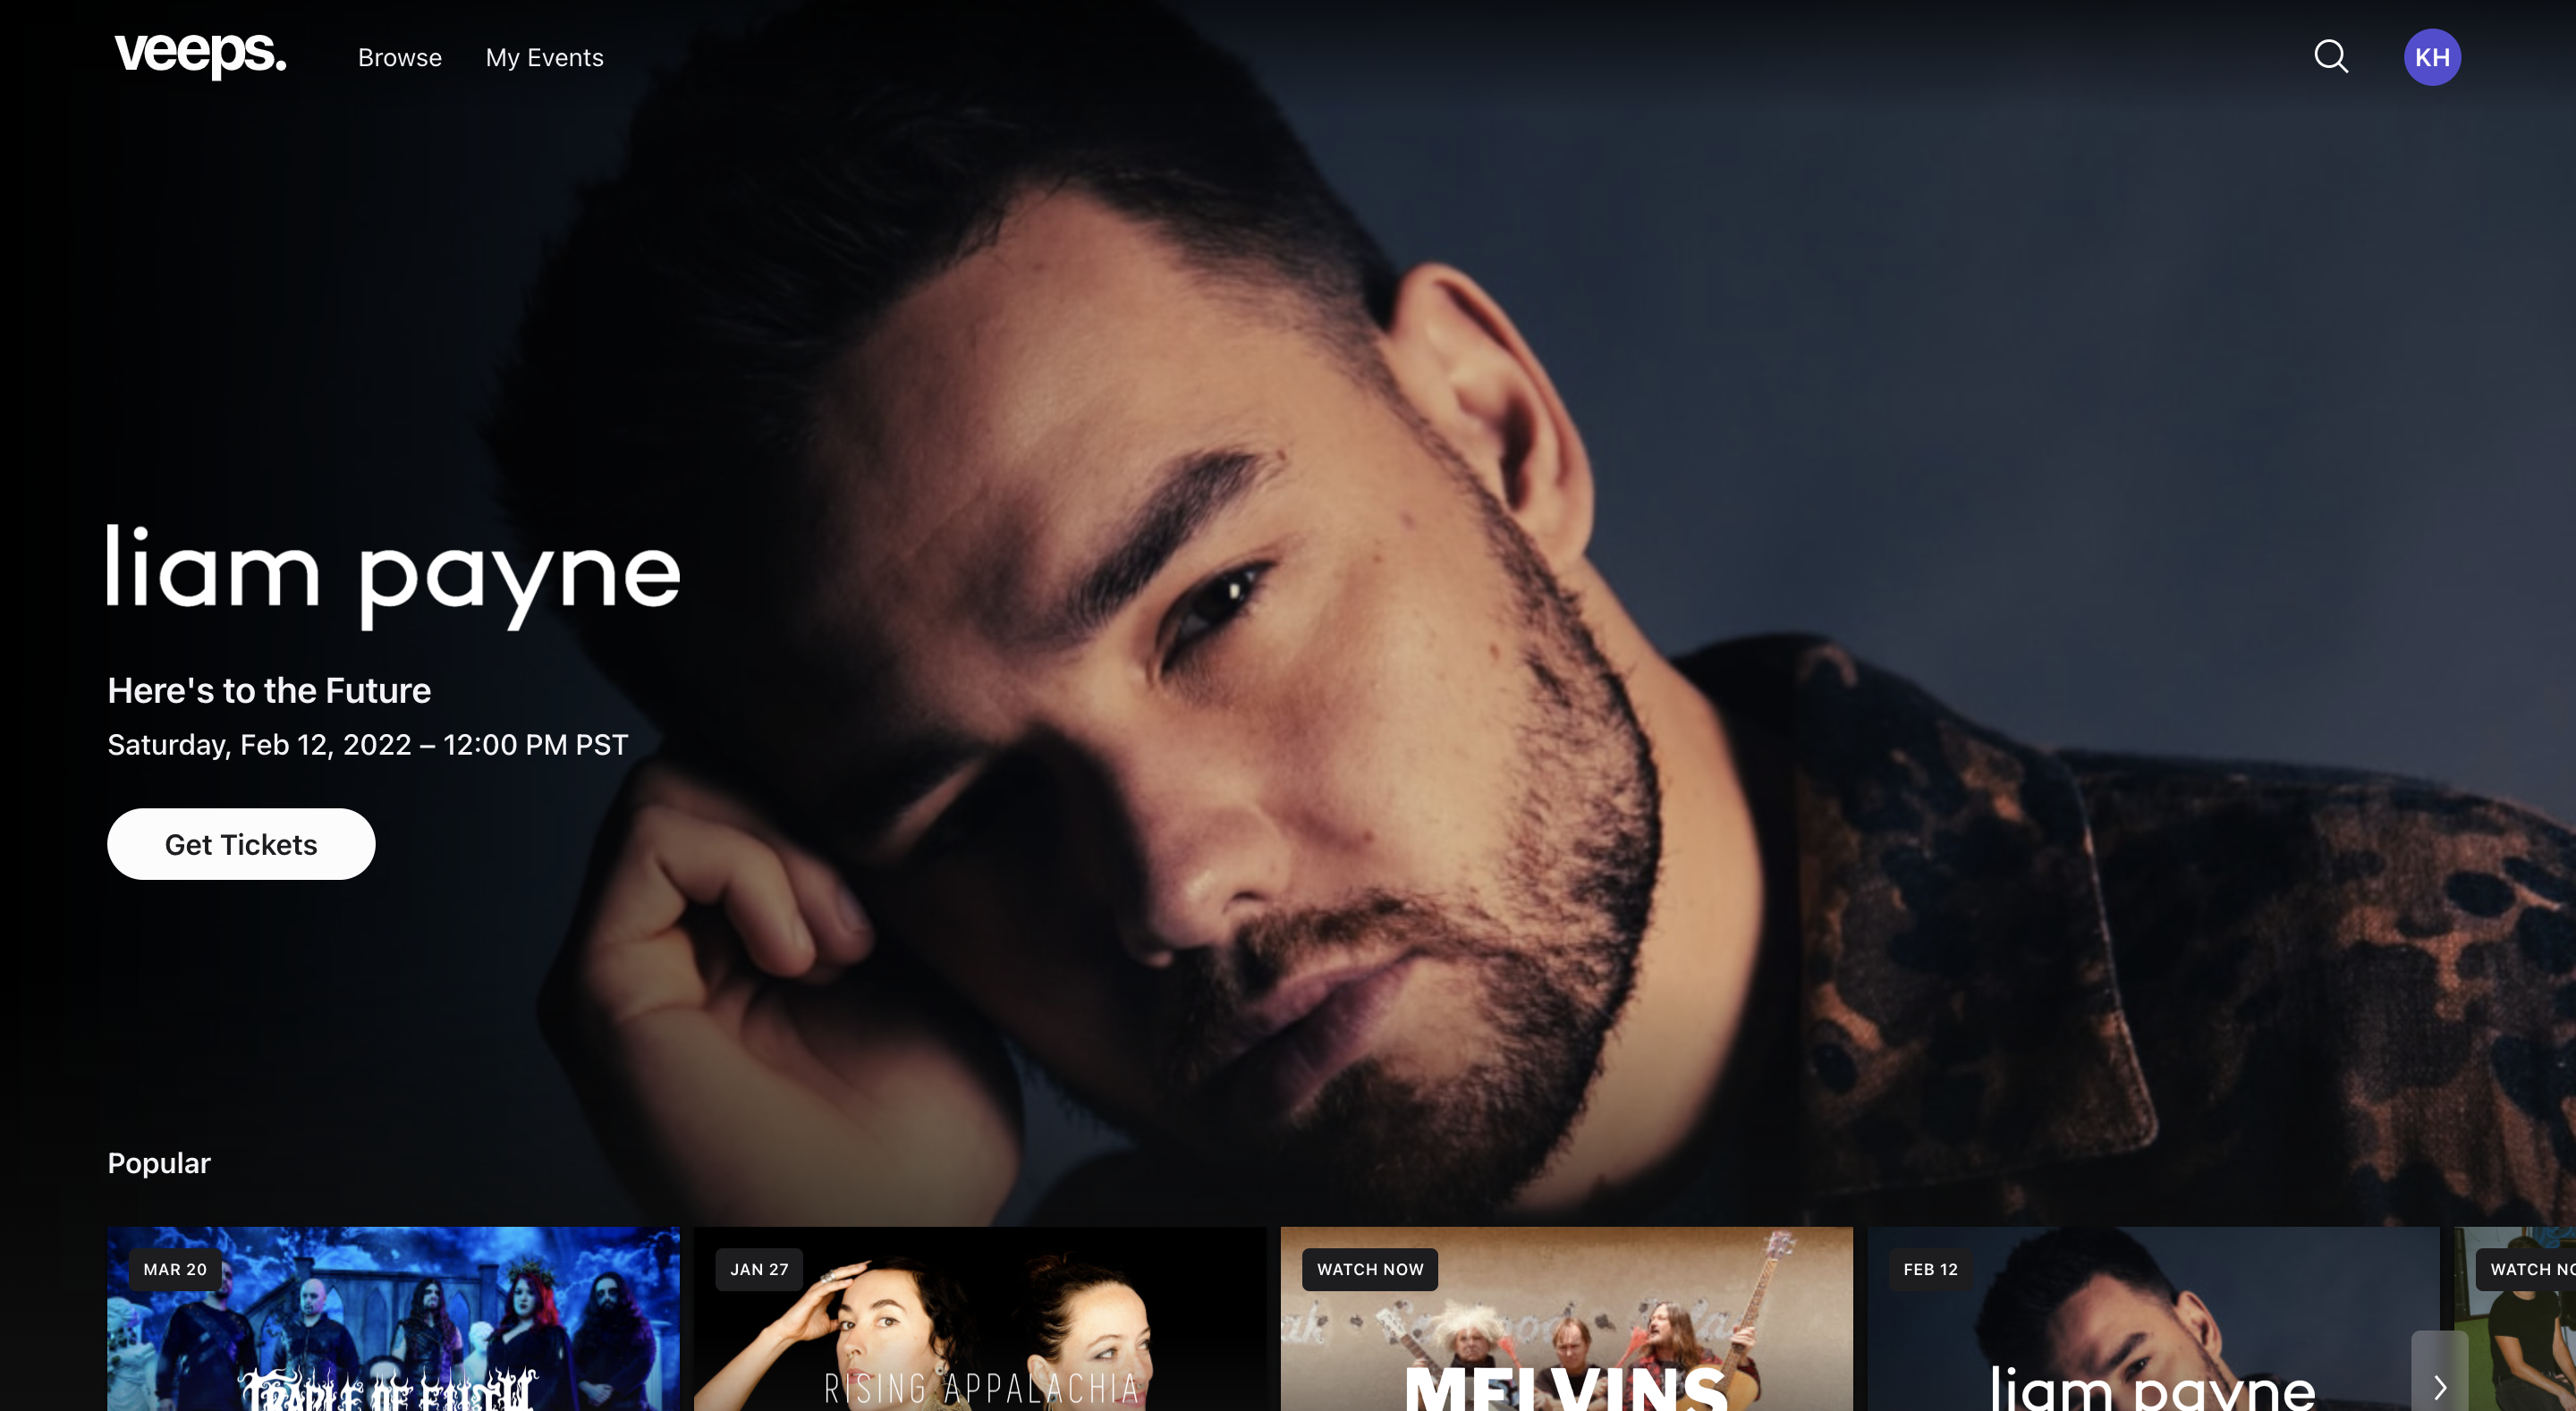 Veeps homepage showing musician Liam Payne and a carousel of other popular artists below.